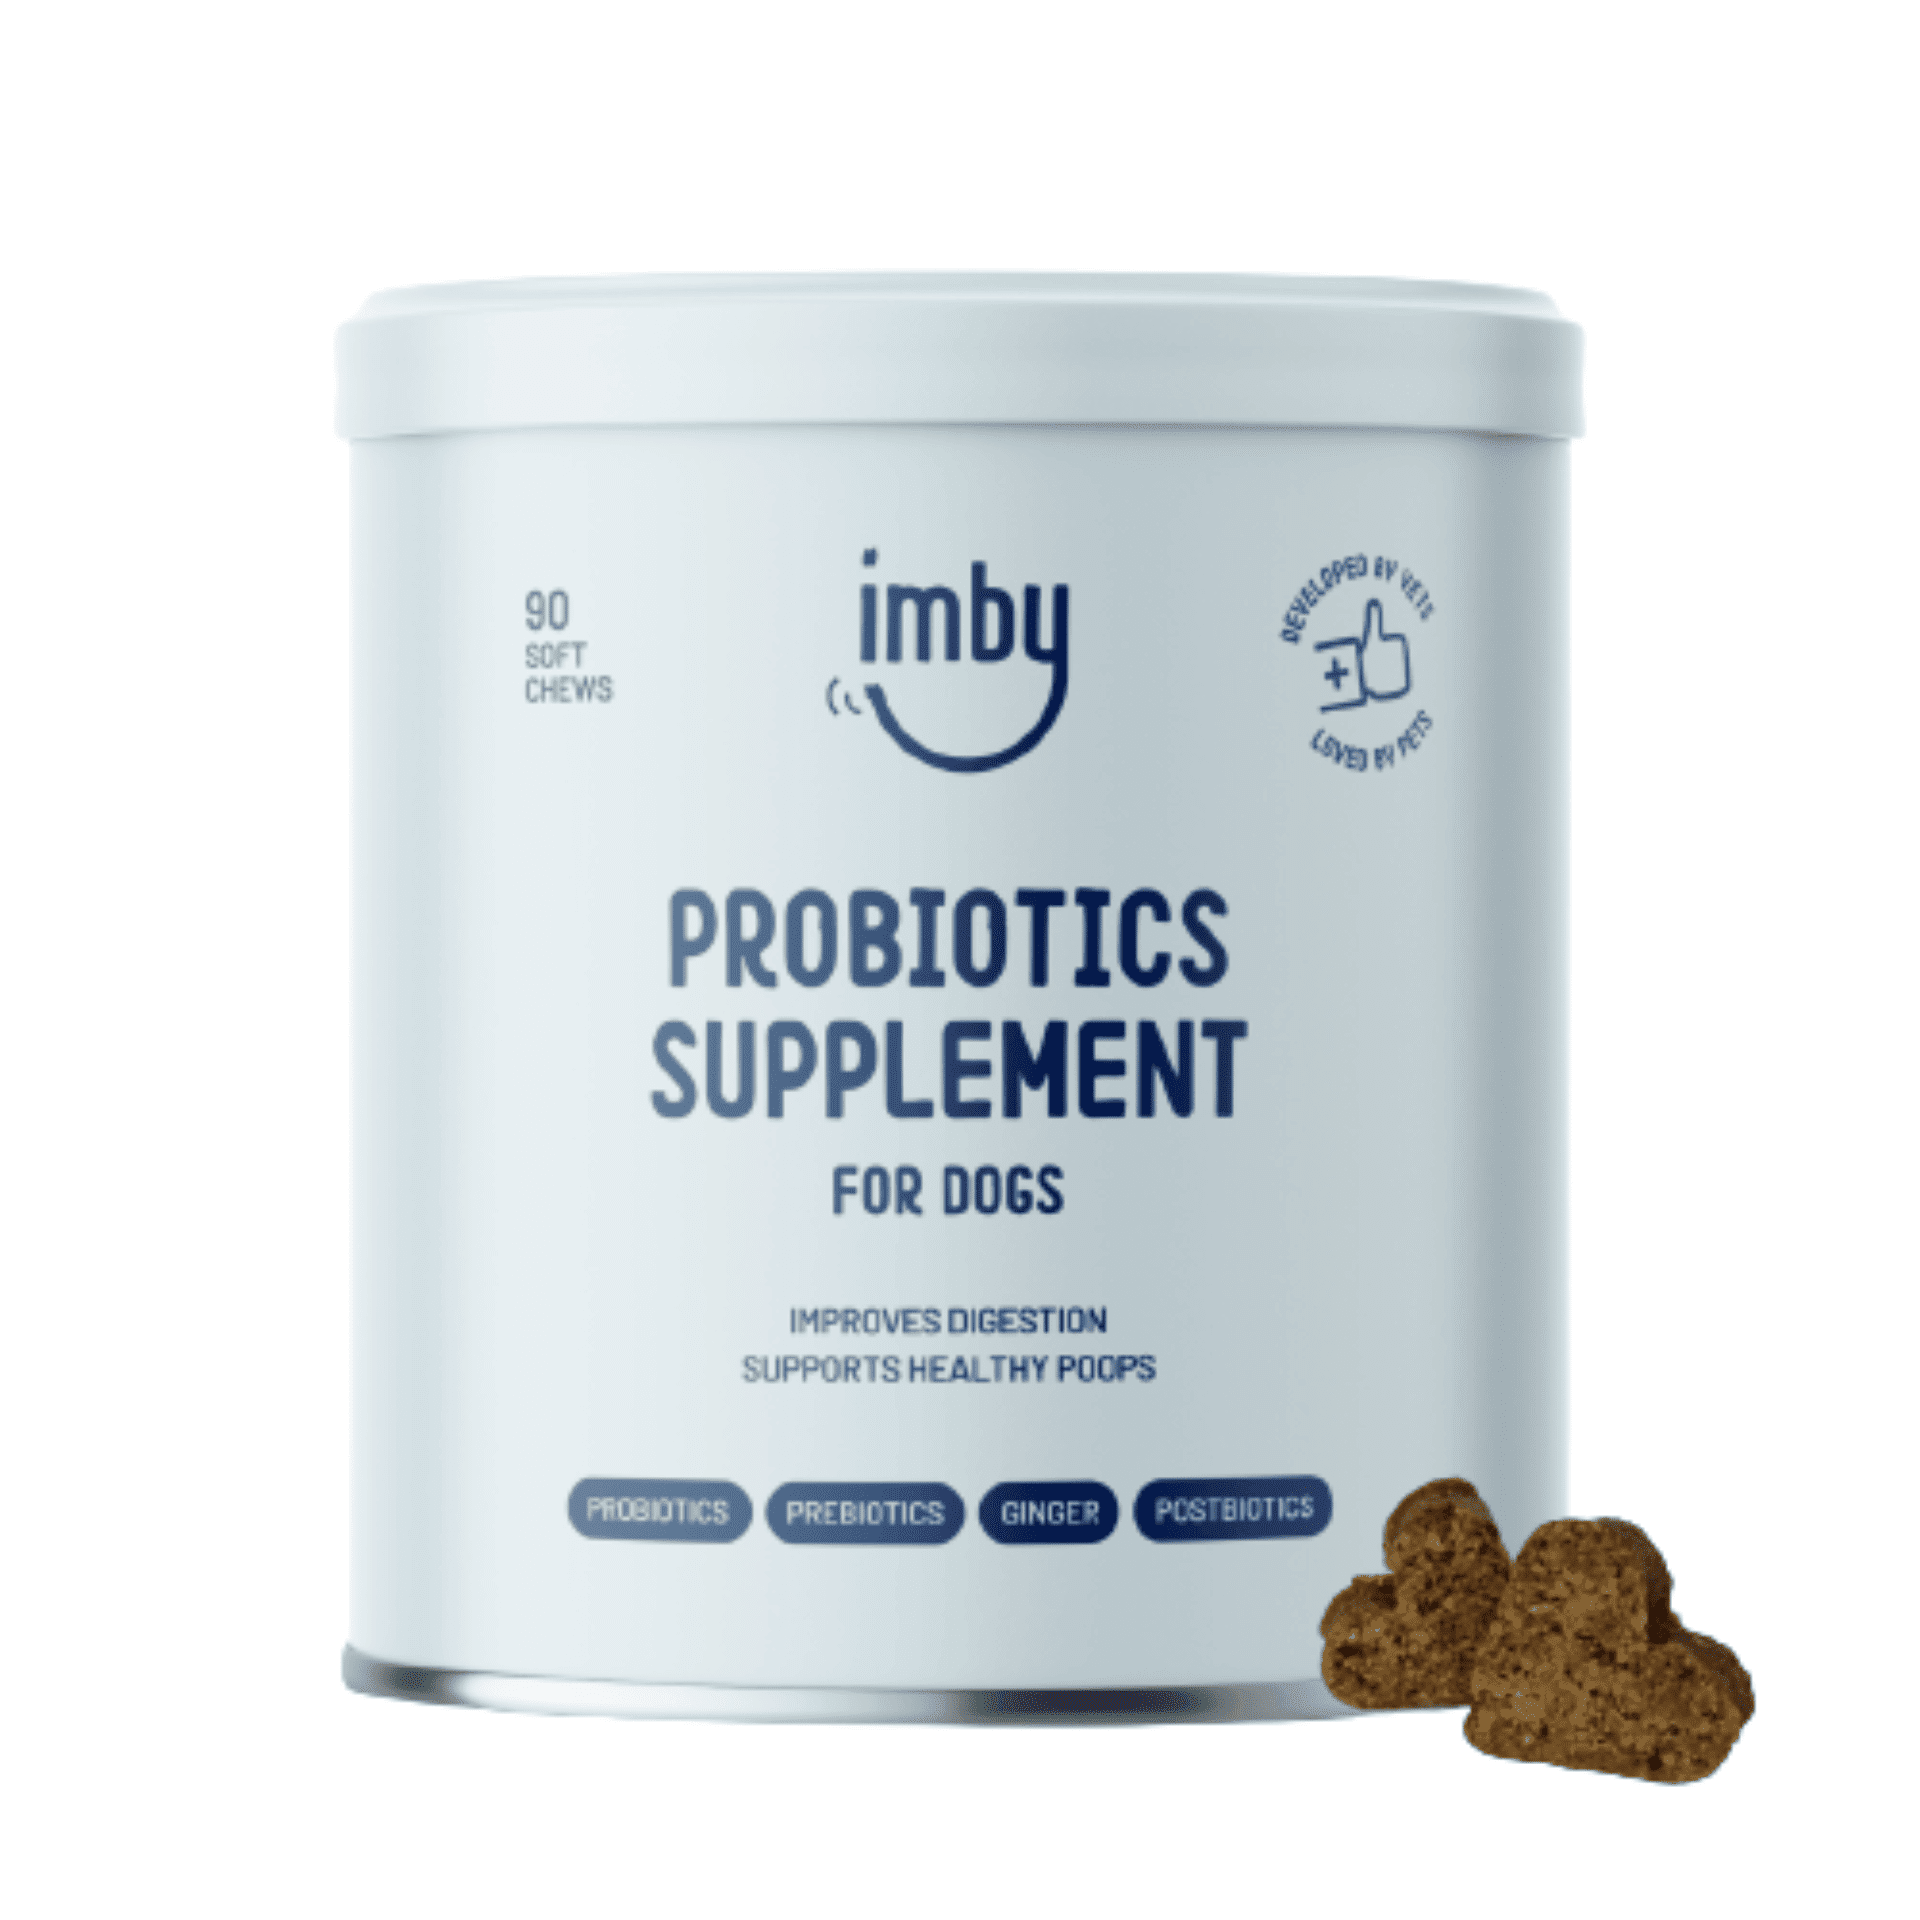 Imby Probiotics Supplement for Dogs